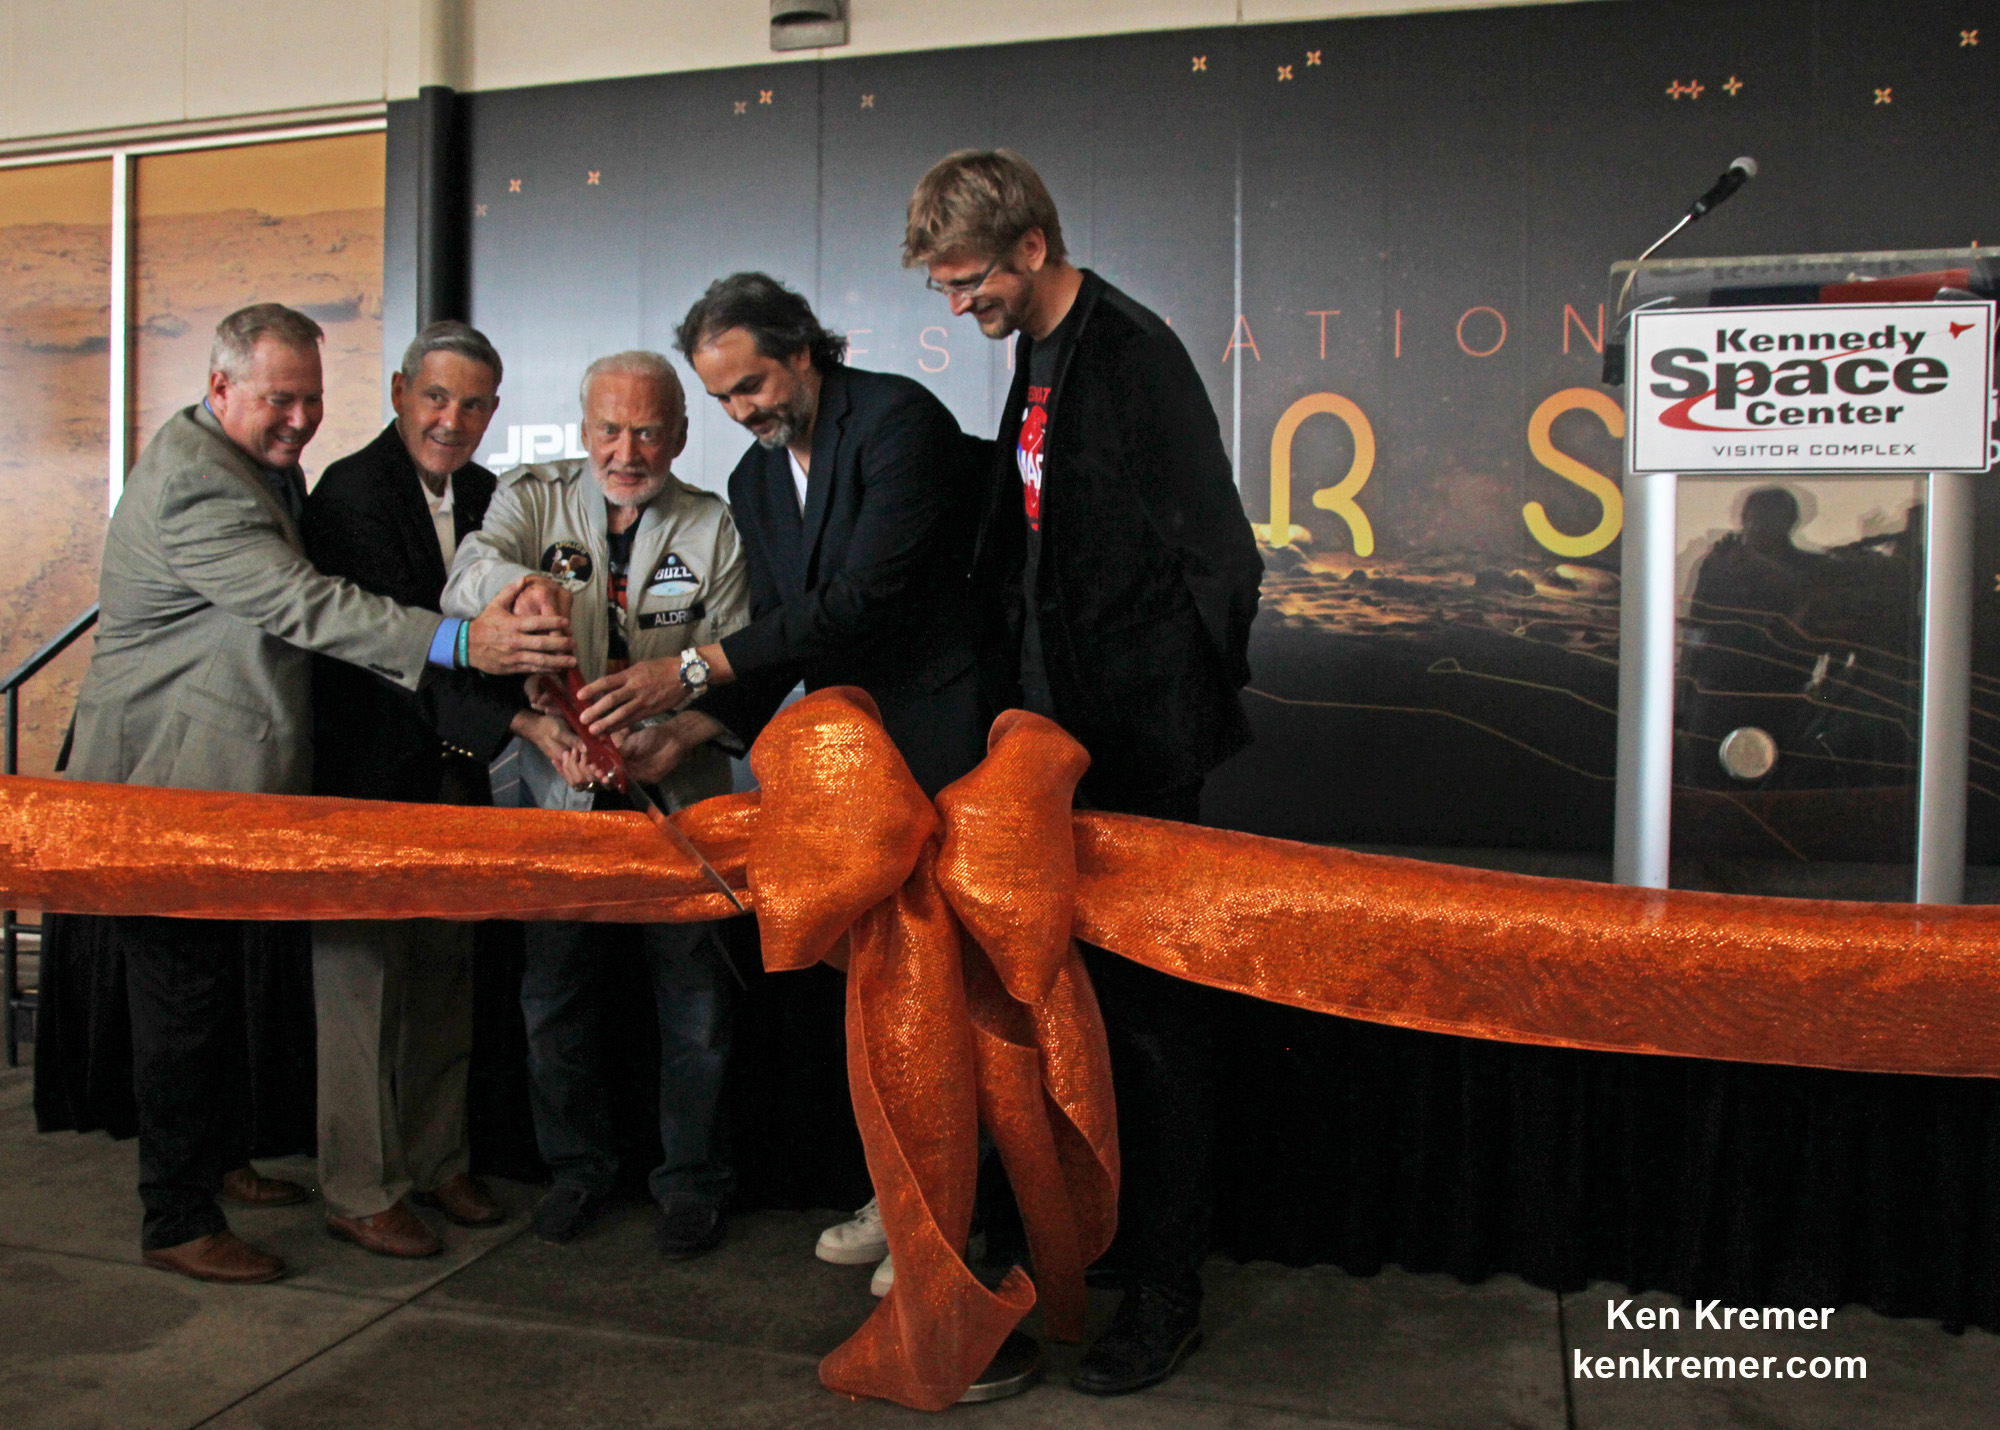 A ceremonial ribbon is cut for the opening of new "Destination: Mars" experience at the Kennedy Space Center visitor complex in Florida during media preview on Sept. 18, 2016. From the left are Therrin Protze, chief operating officer of the visitor complex; center director Bob Cabana; Apollo 11 astronaut Buzz Aldrin; Kudo Tsunoda of Microsoft; and Jeff Norris of NASA's Jet Propulsion Laboratory in Pasadena, California. Credit: Ken Kremer/kenkremer.com